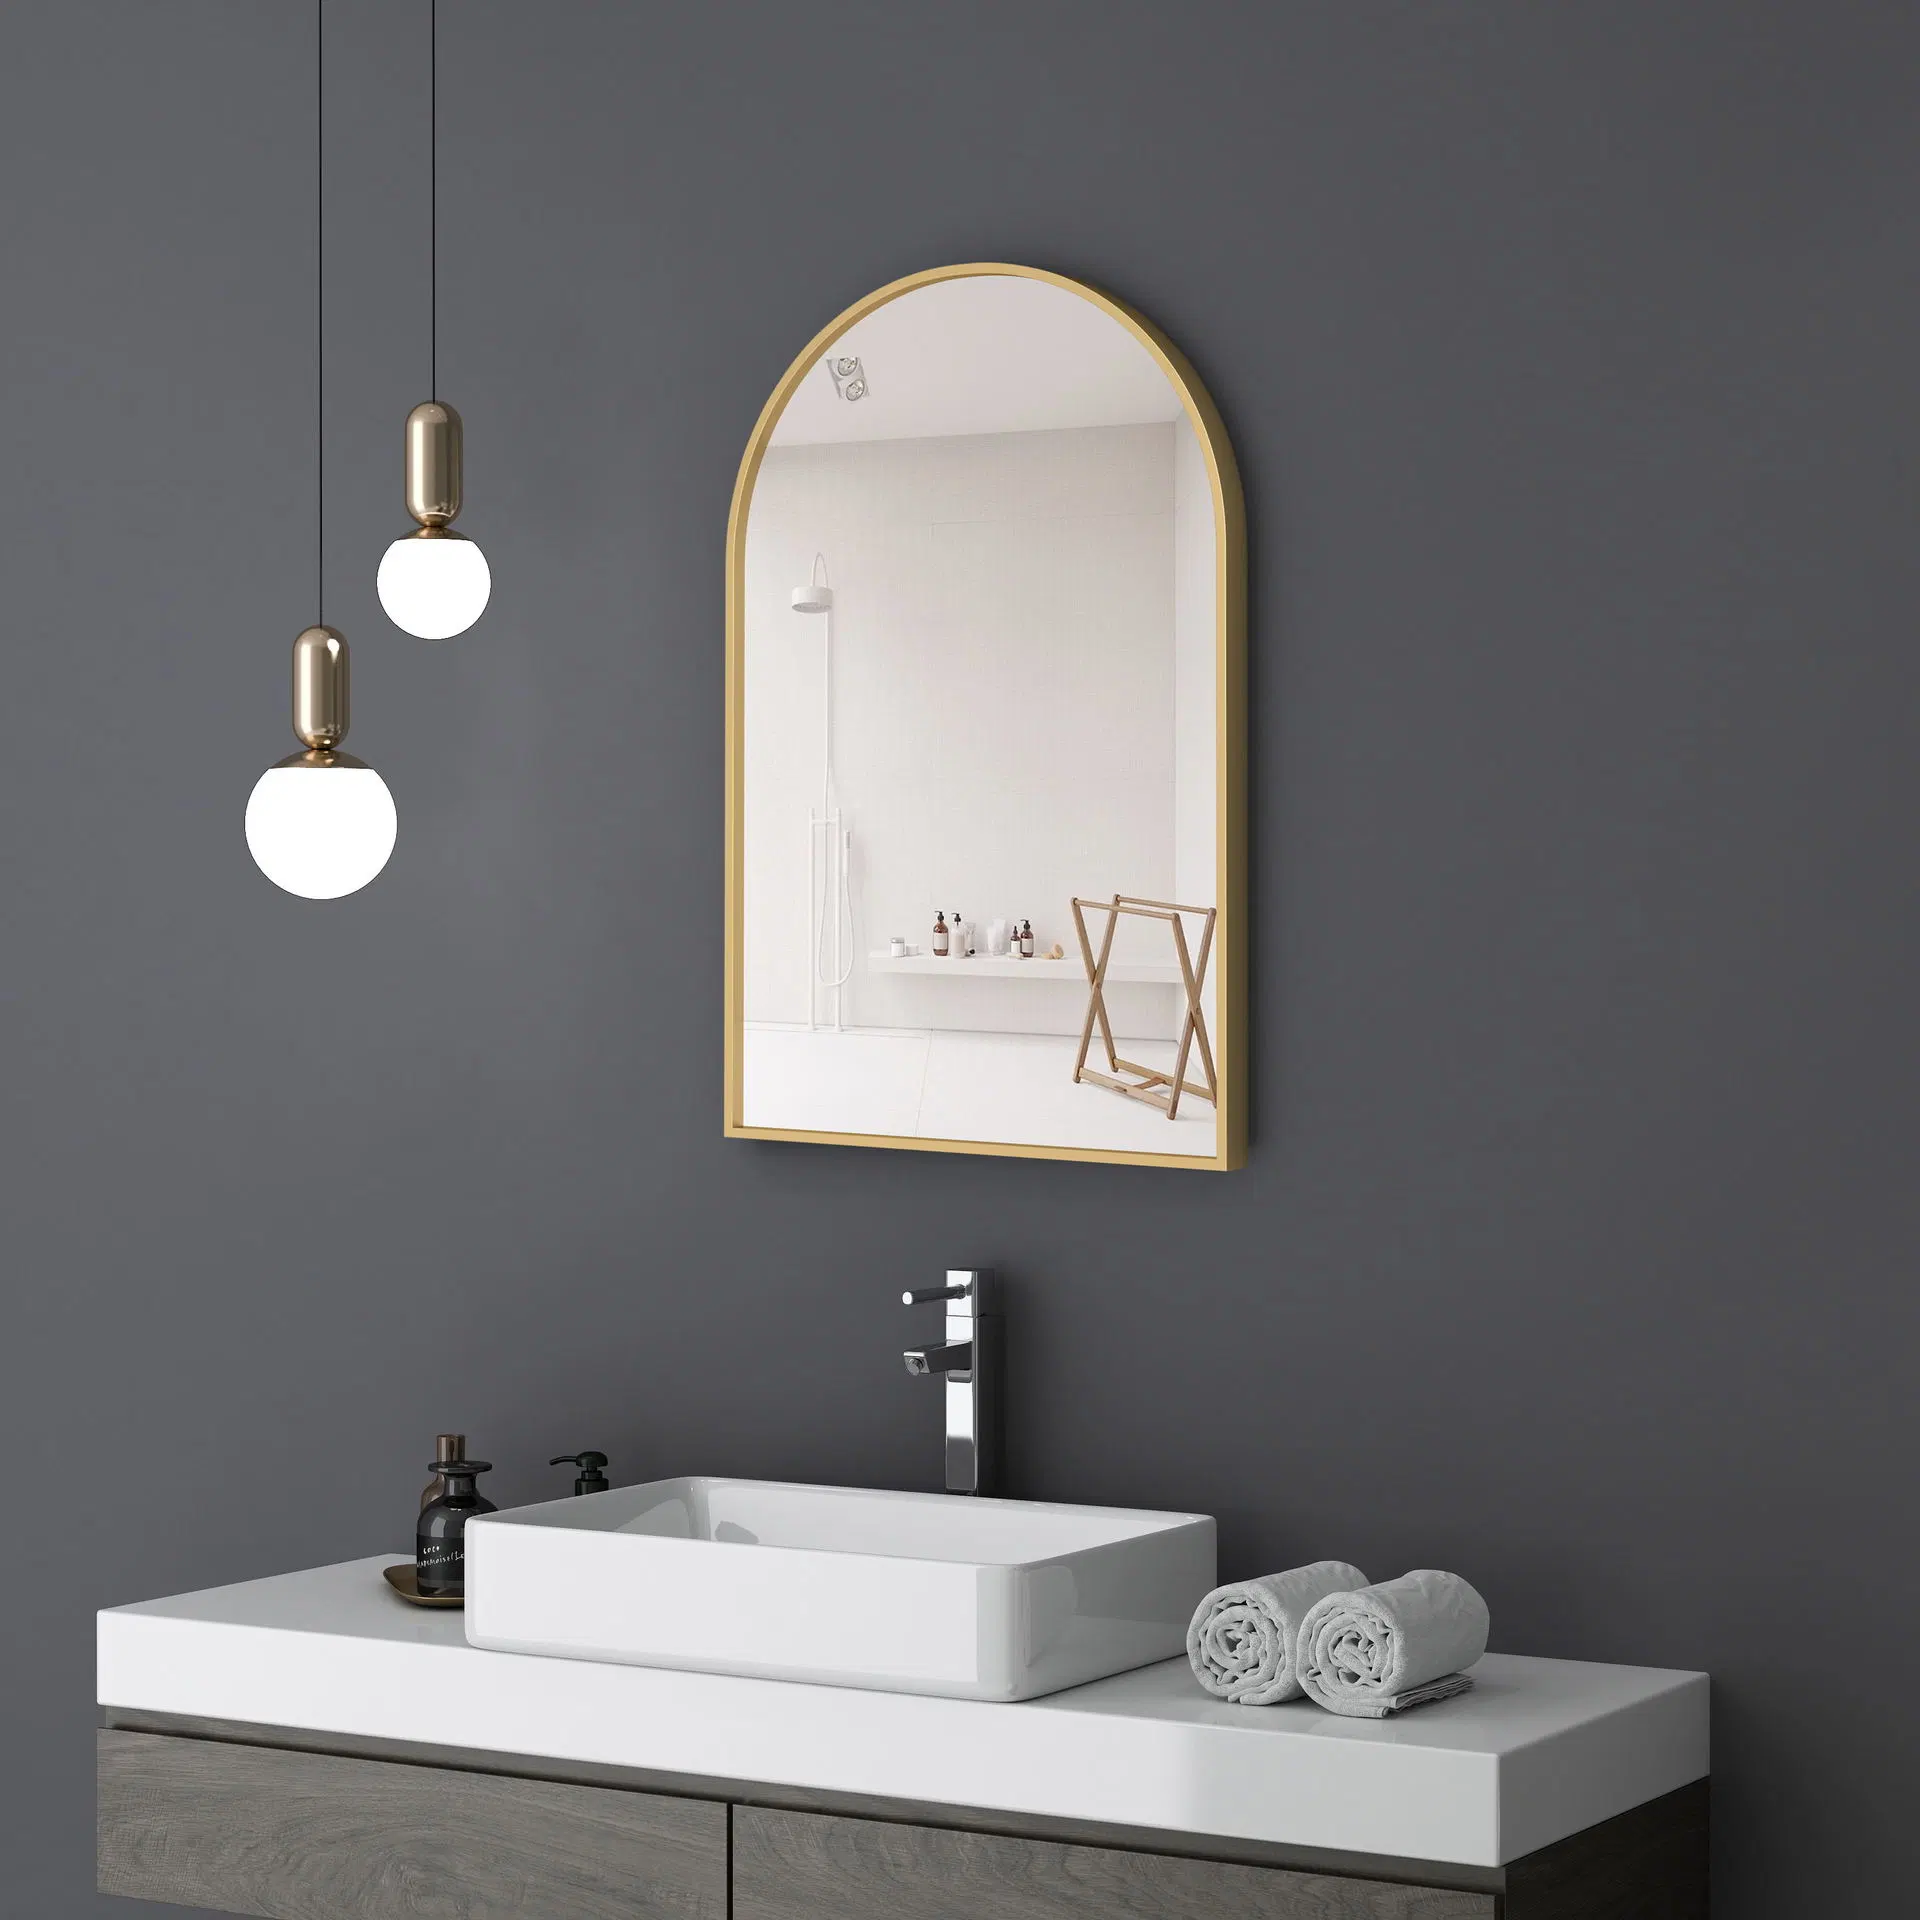 Nordic Wall Hanging Art Fitting Makeup Bathroom Vanity Wall-Mounted Toilet Porch Decorative Mirror